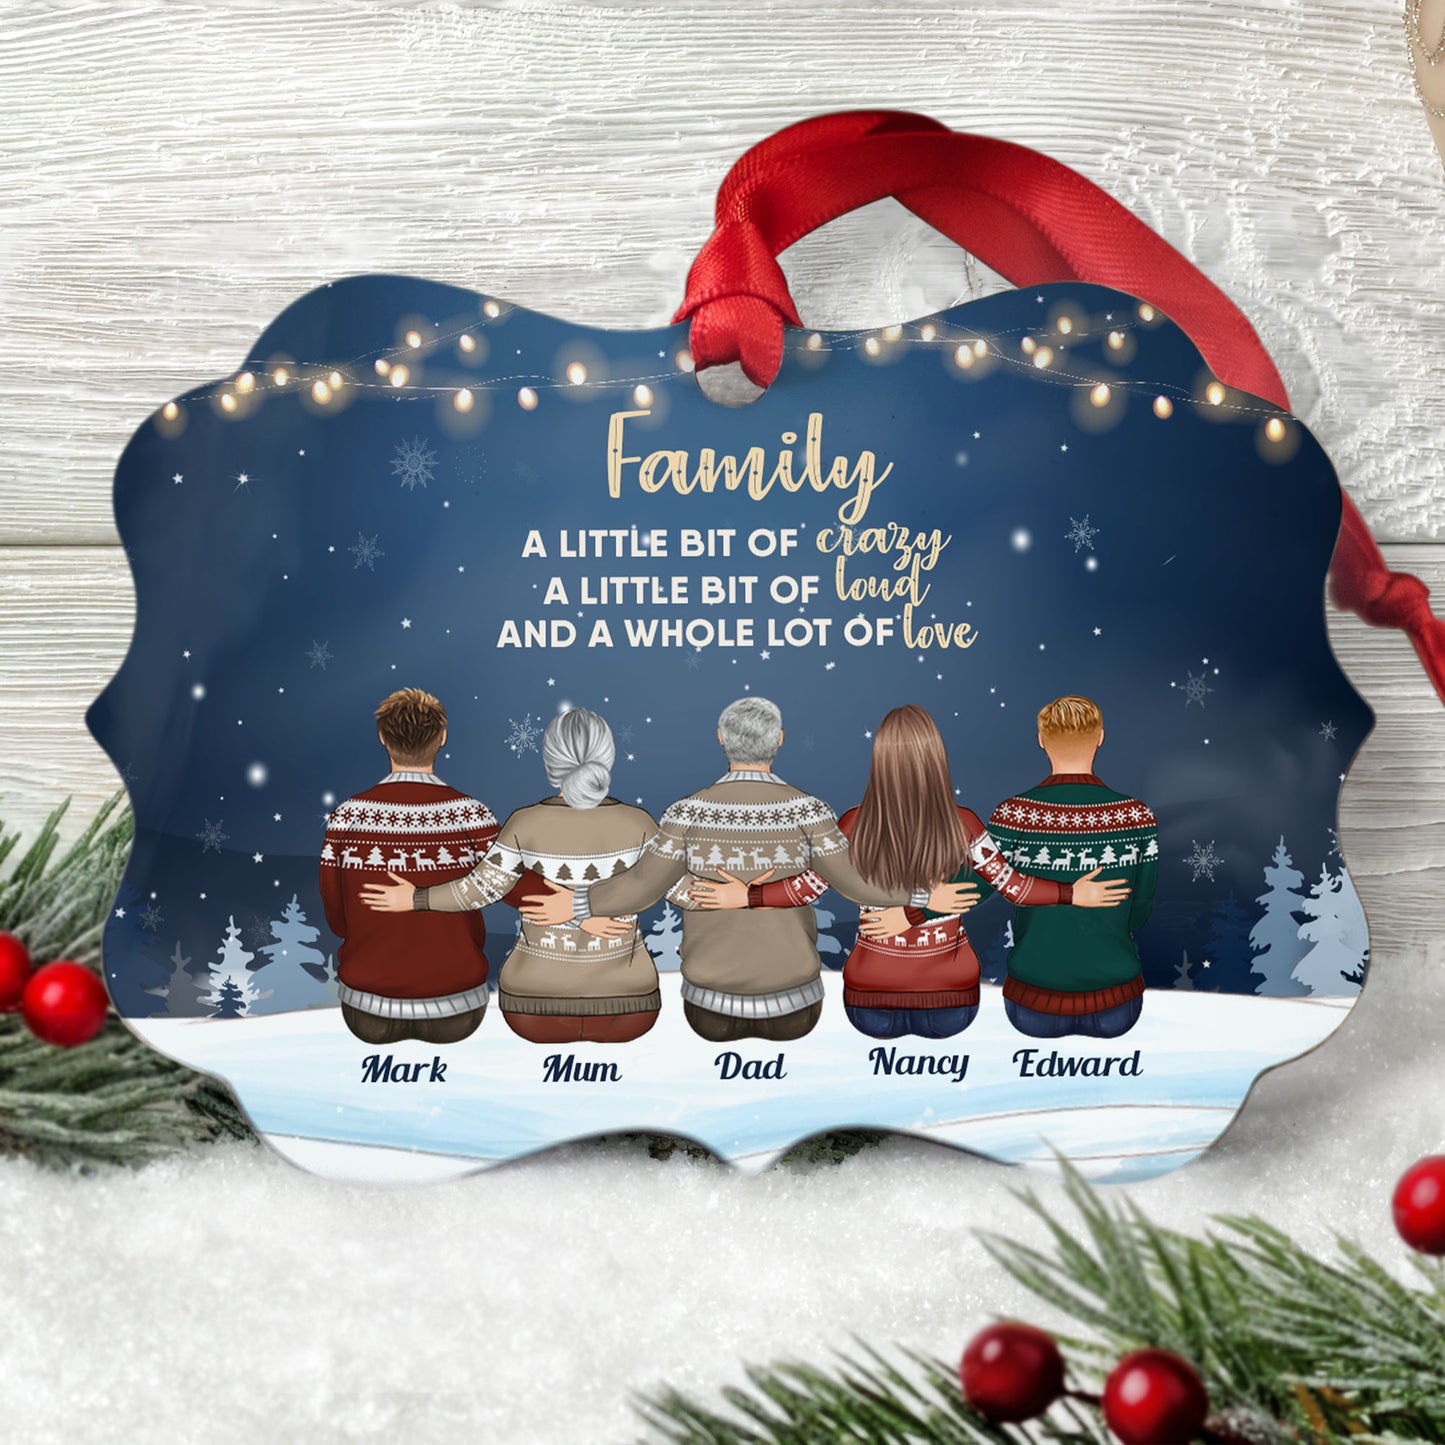 Family Never Apart - Personalized Aluminum Ornament - Christmas Gift Family Ornament For Dad, Mom, Siblings - Family Hugging